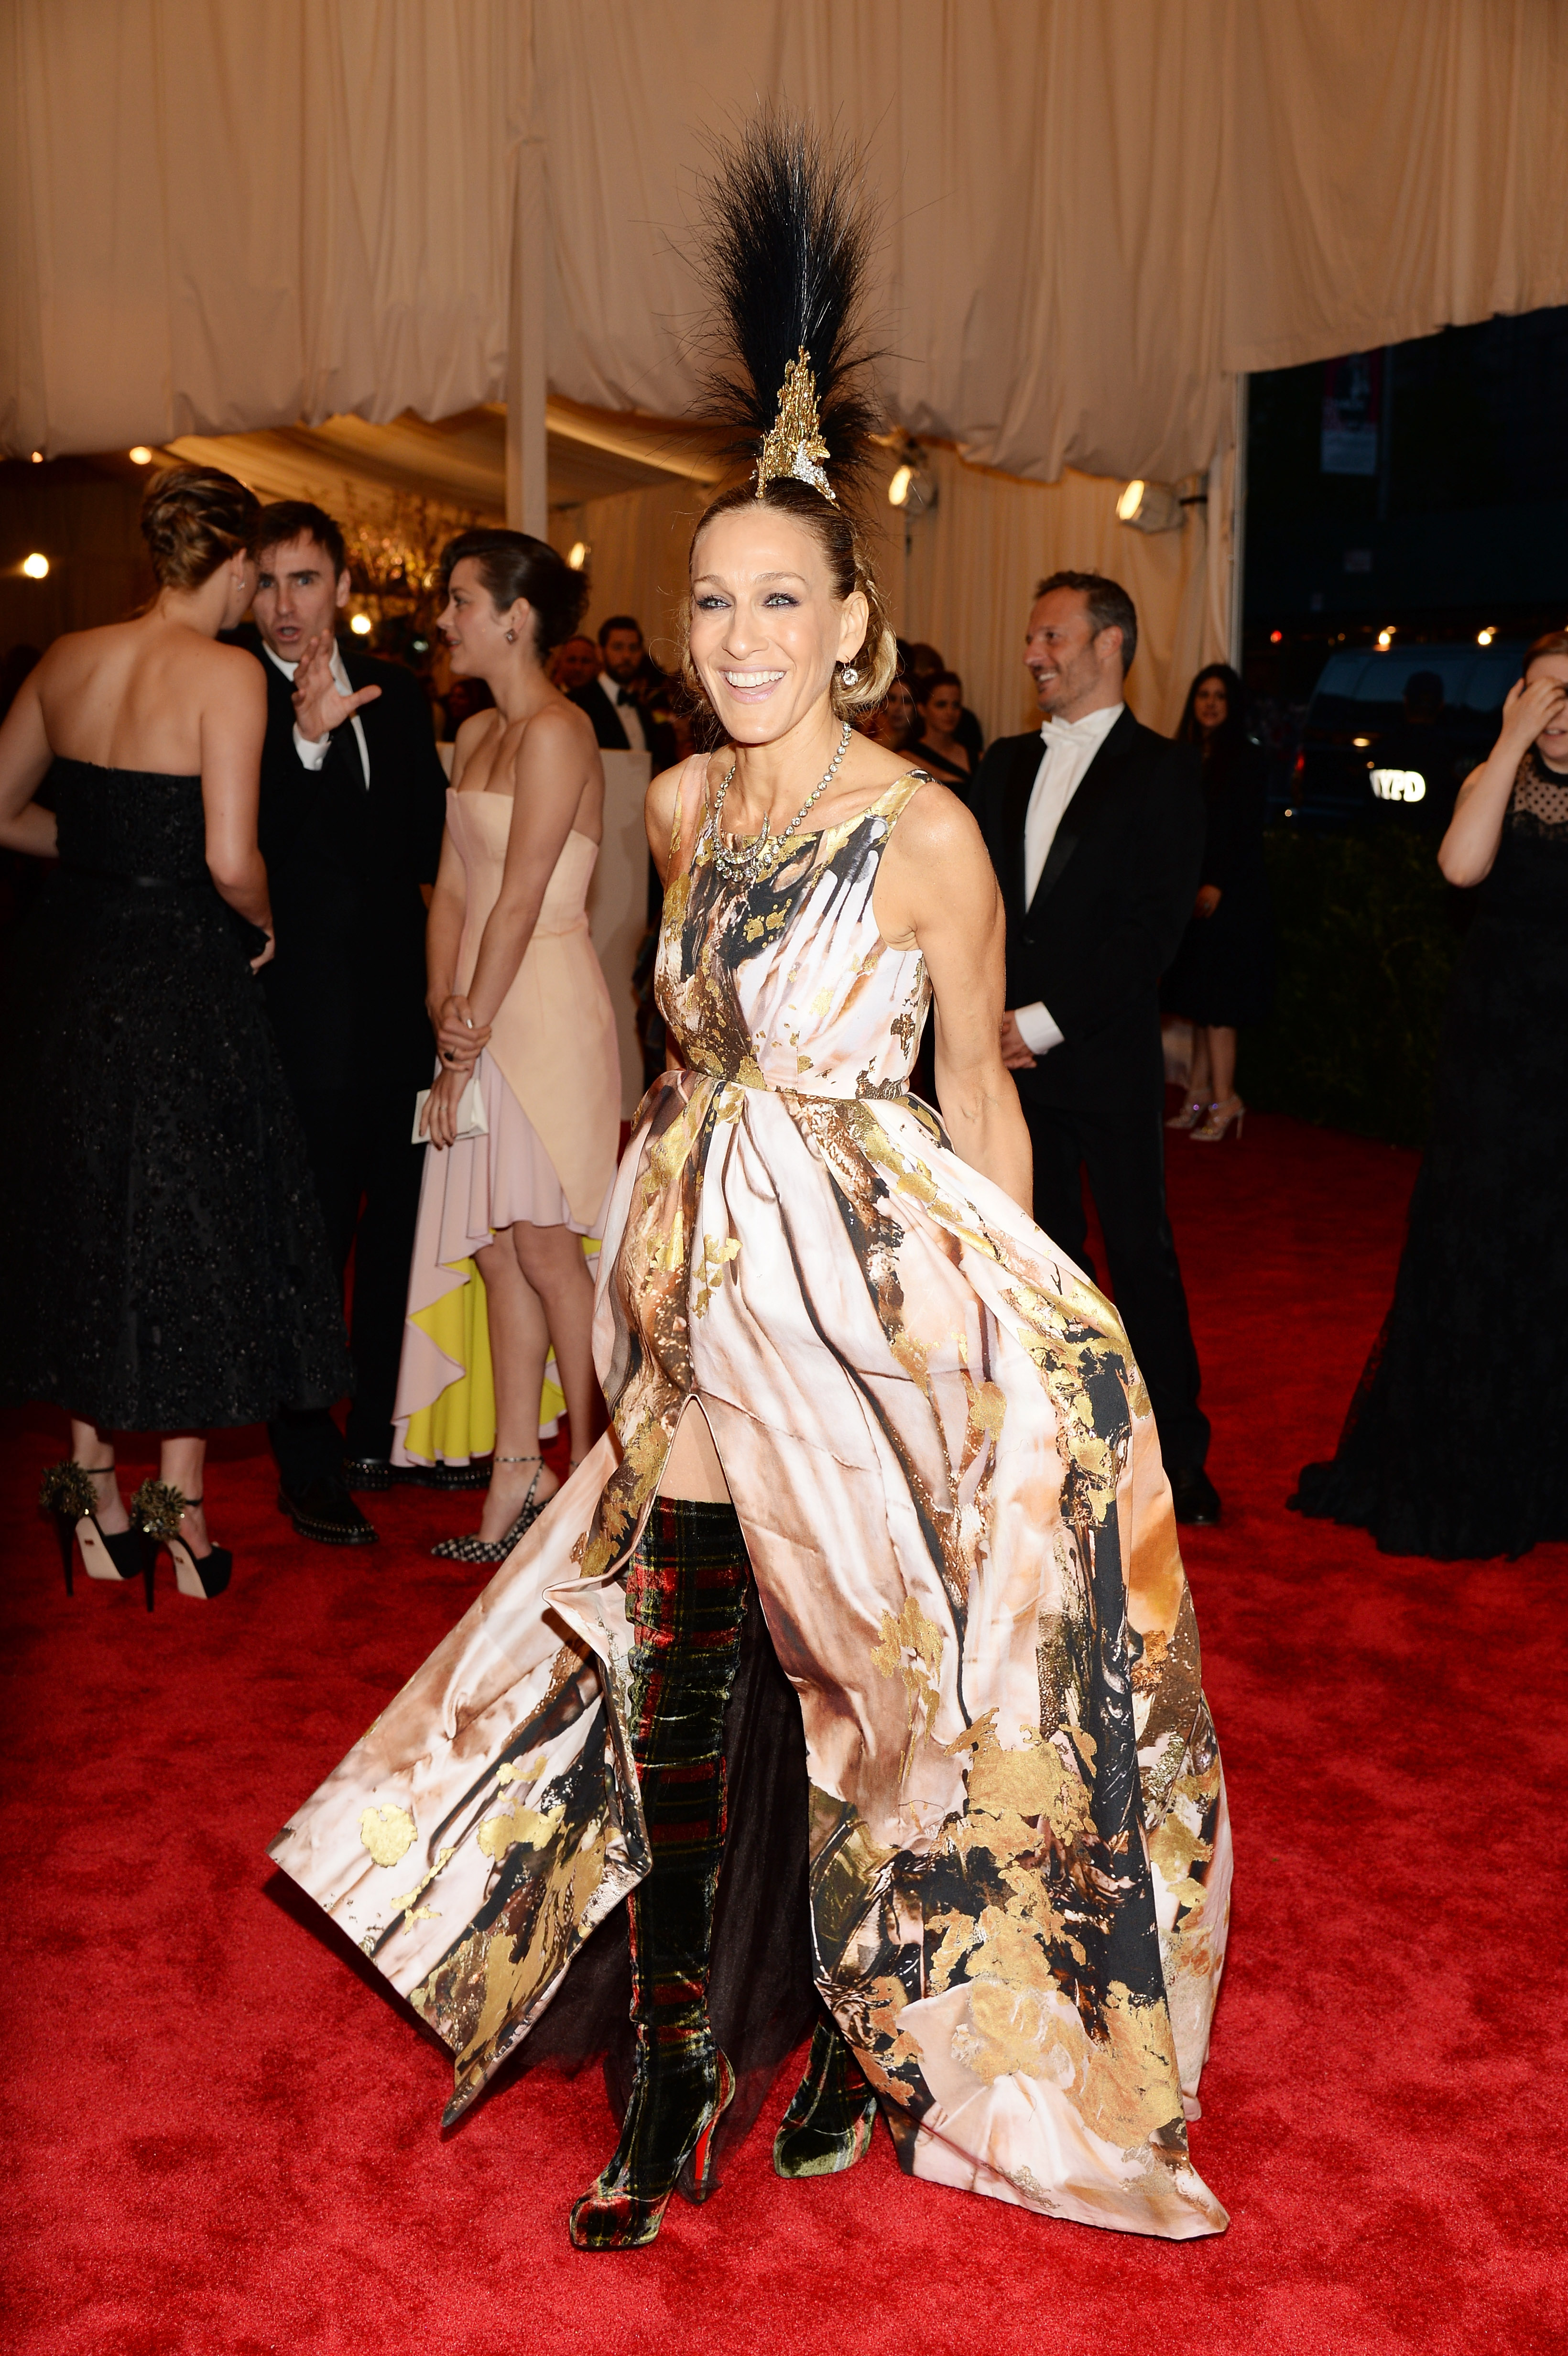 NEW YORK, NY - MAY 06:  Actress Sarah Jessica Parker attends the Costume Institute Gala for the "PUNK: Chaos to Couture" exhibition at the Metropolitan Museum of Art on May 6, 2013 in New York City.  (Photo by Dimitrios Kambouris/Getty Images)